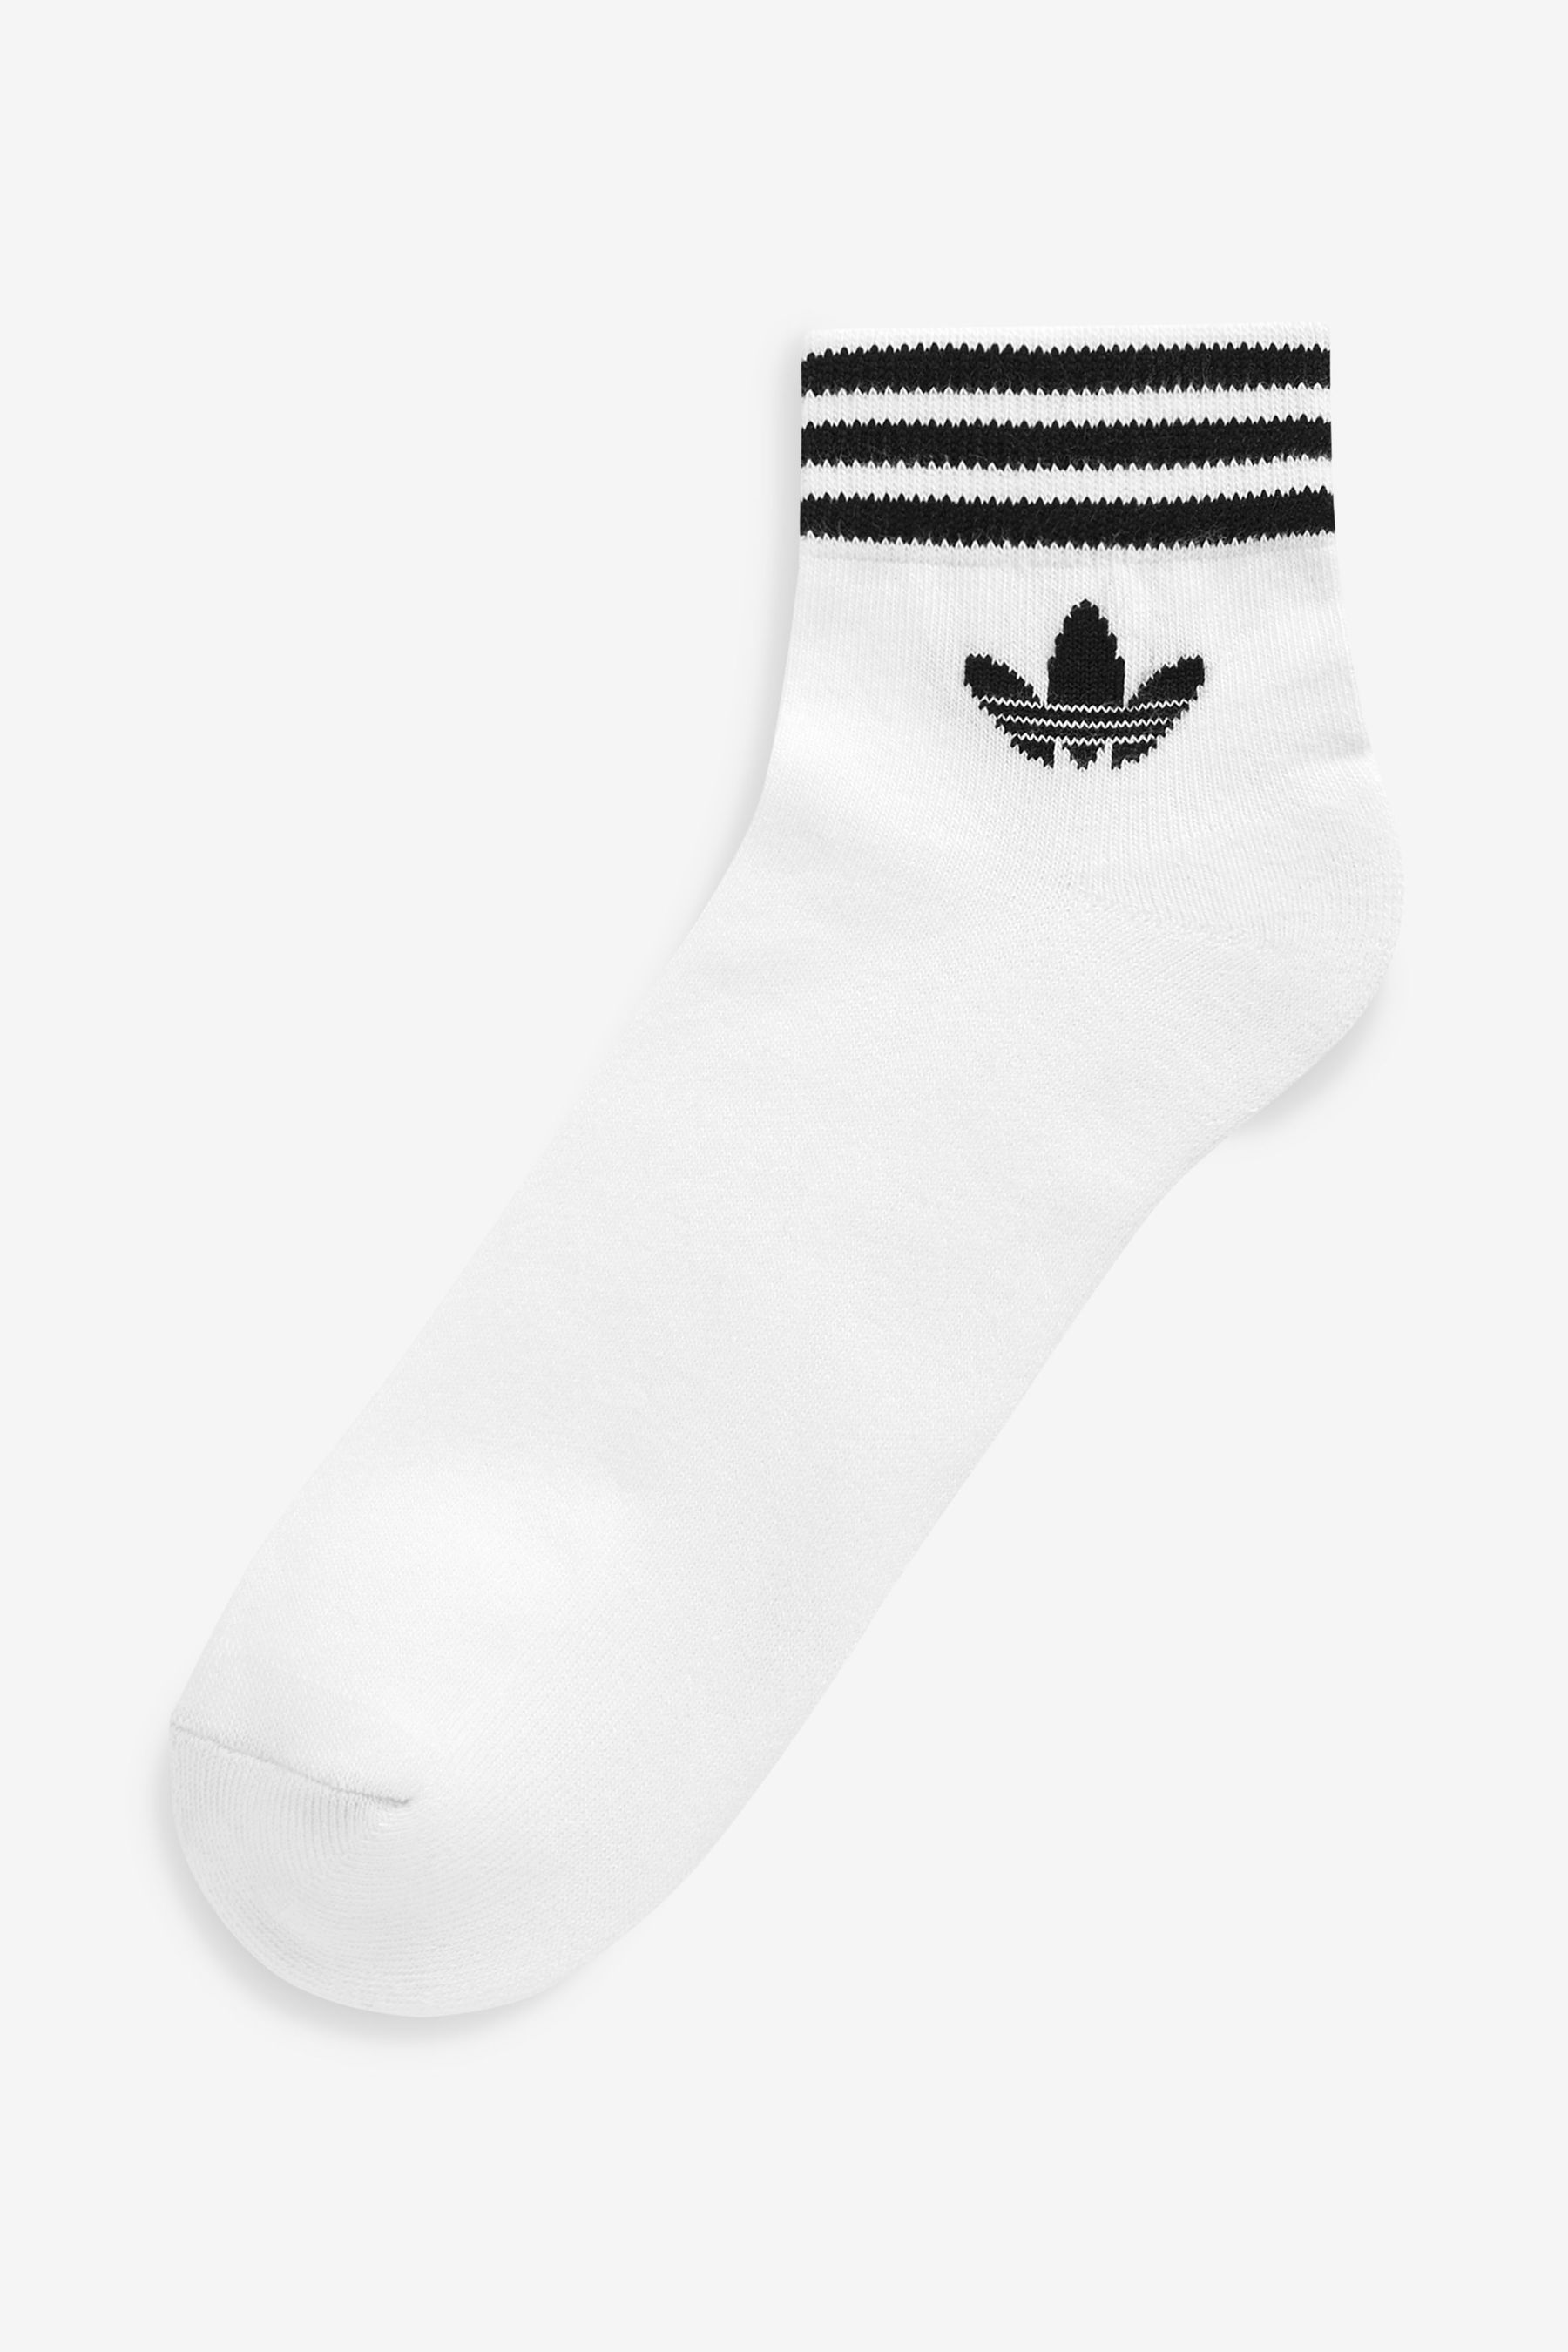 Buy adidas Originals Adult Black Mid Cut Ankle Socks from the Next UK ...